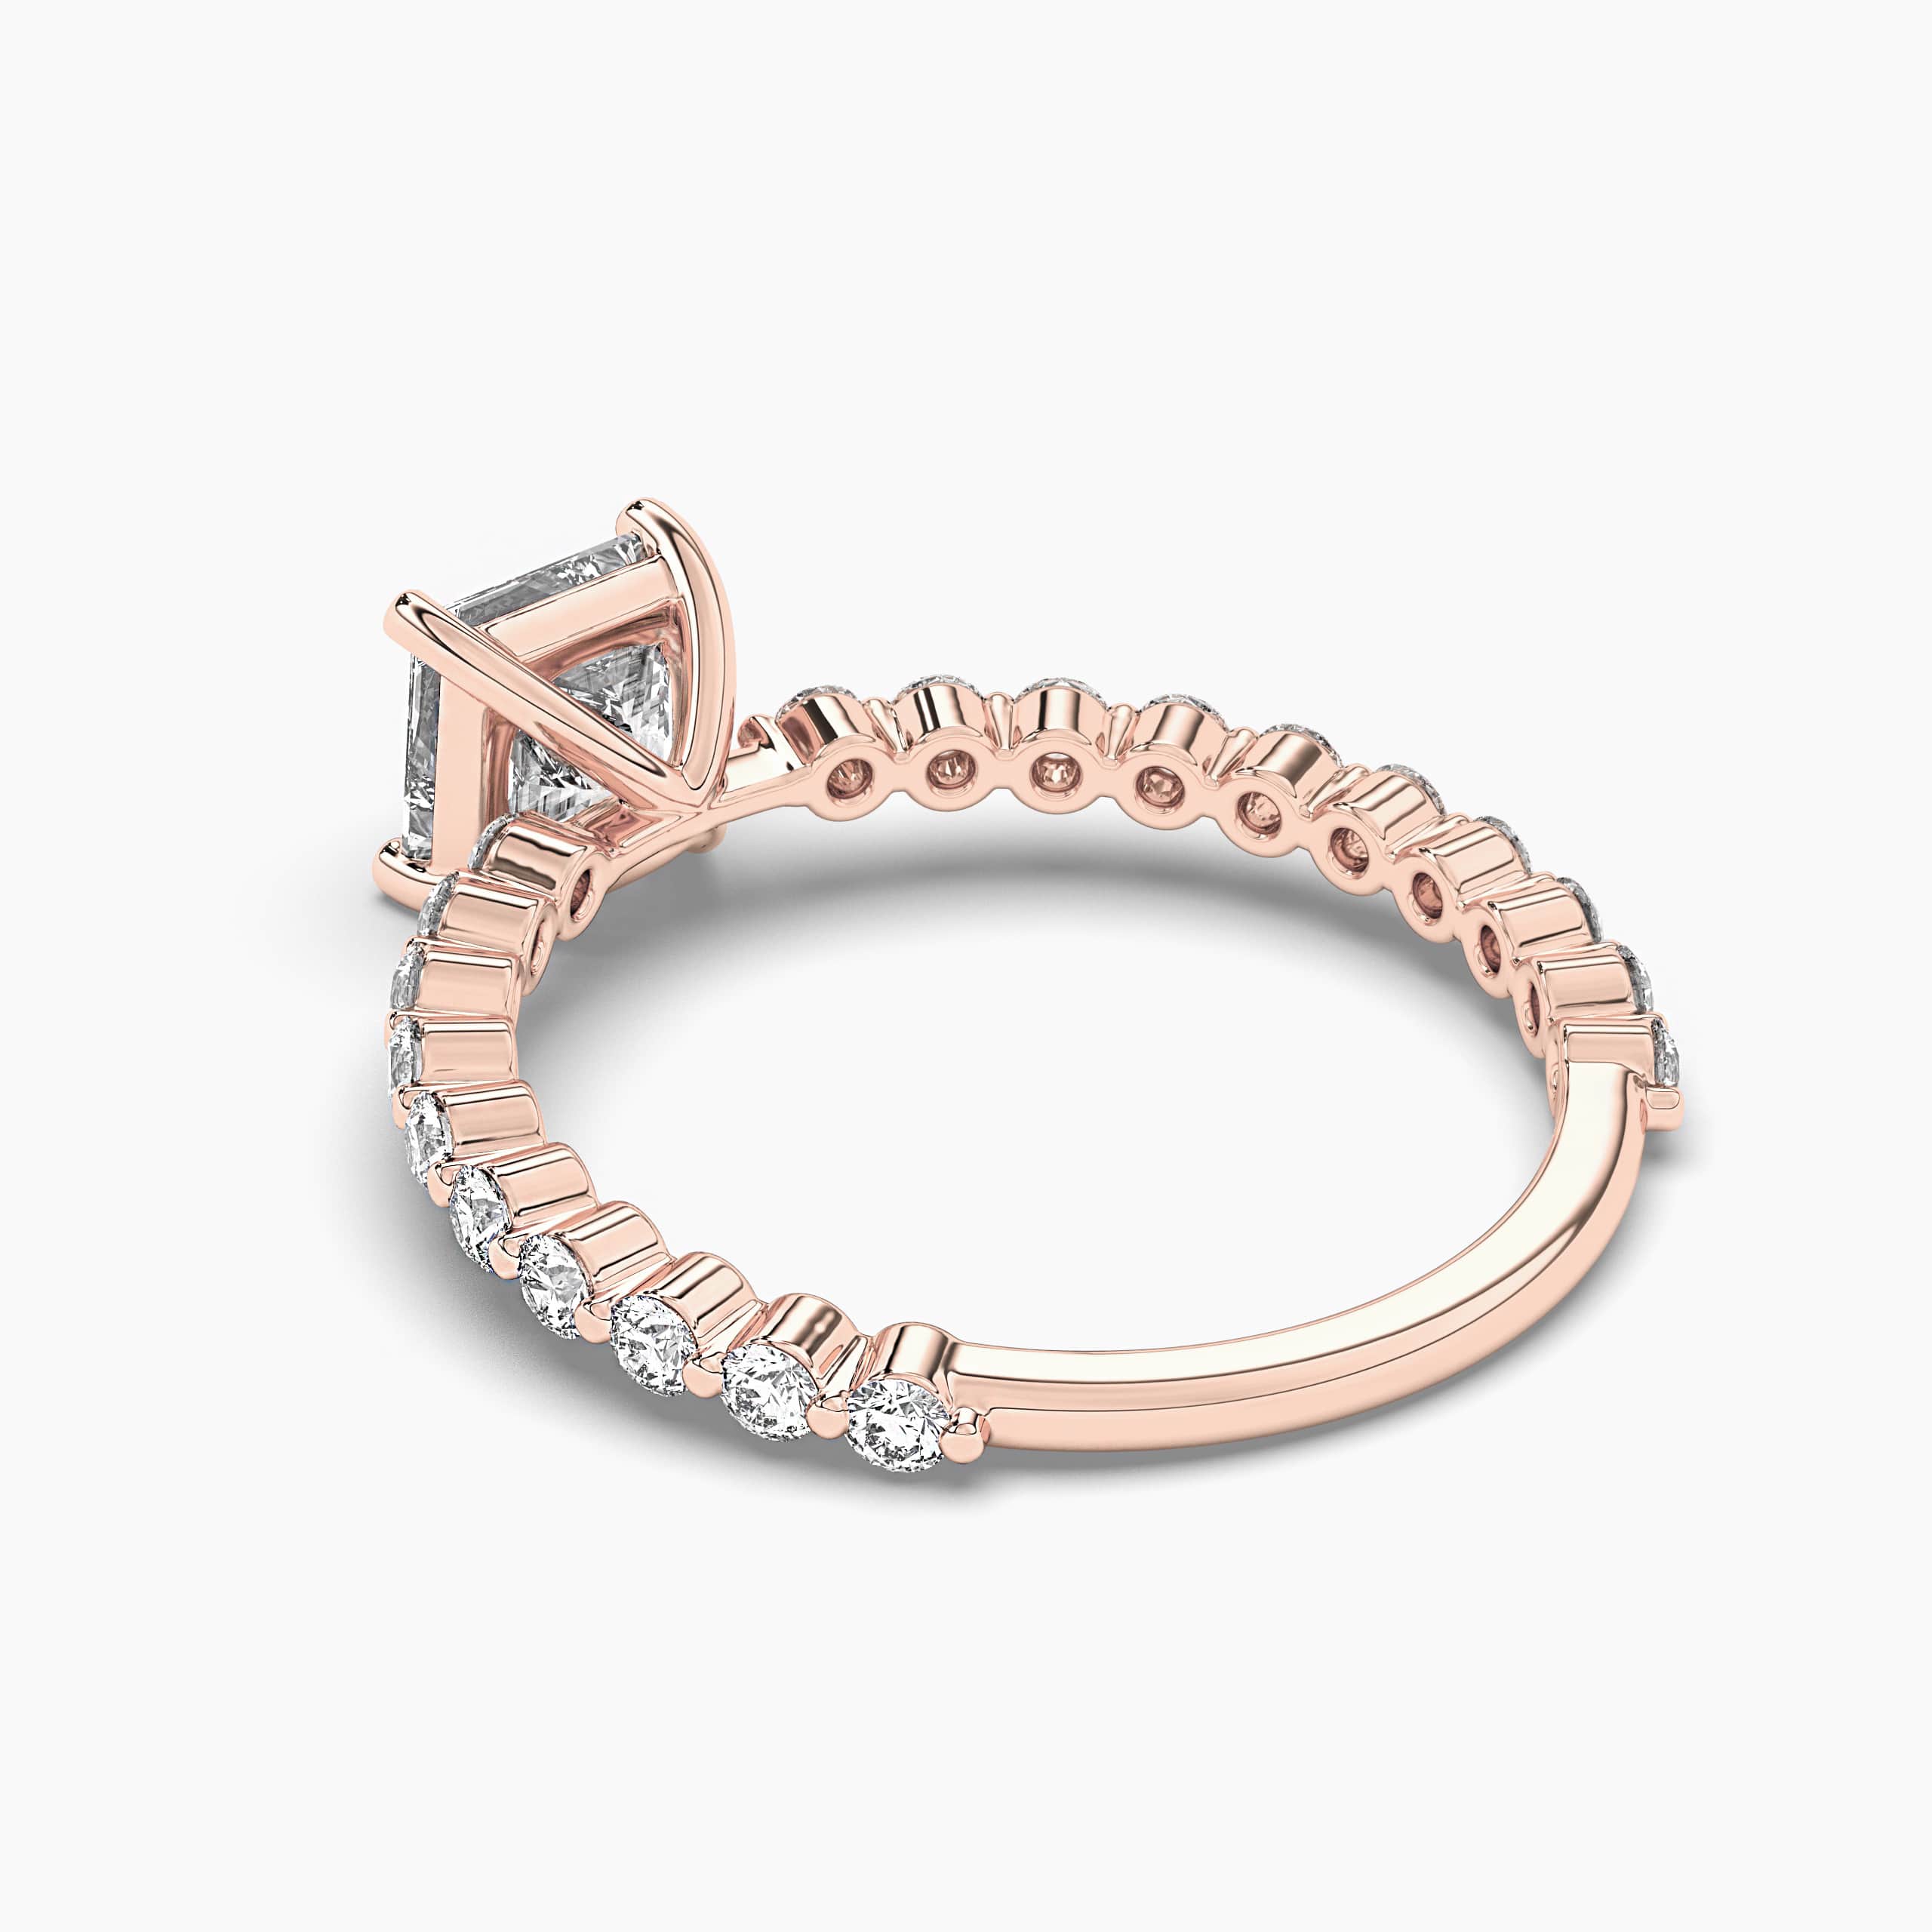 Rose Gold 4 Prongs Princess Cut Diamond Engagement Ring With Side Stones